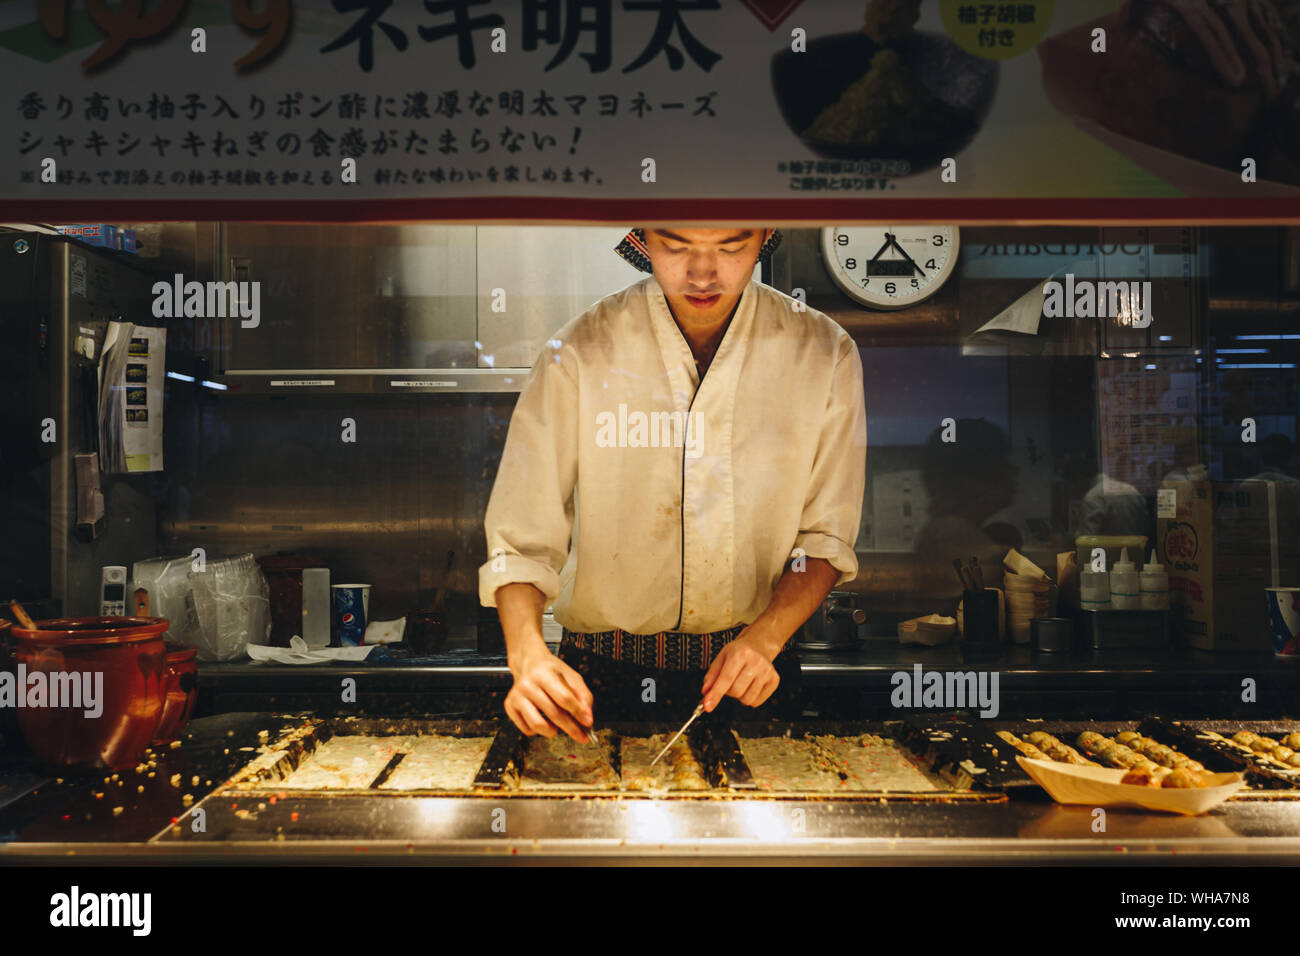 Tokyo, Japan - July 22, 1992 : japanese chef cooking takoyaki in the stall at the train station in Tokyo, Japan. takoyaki is the most popular deliciou Stock Photo